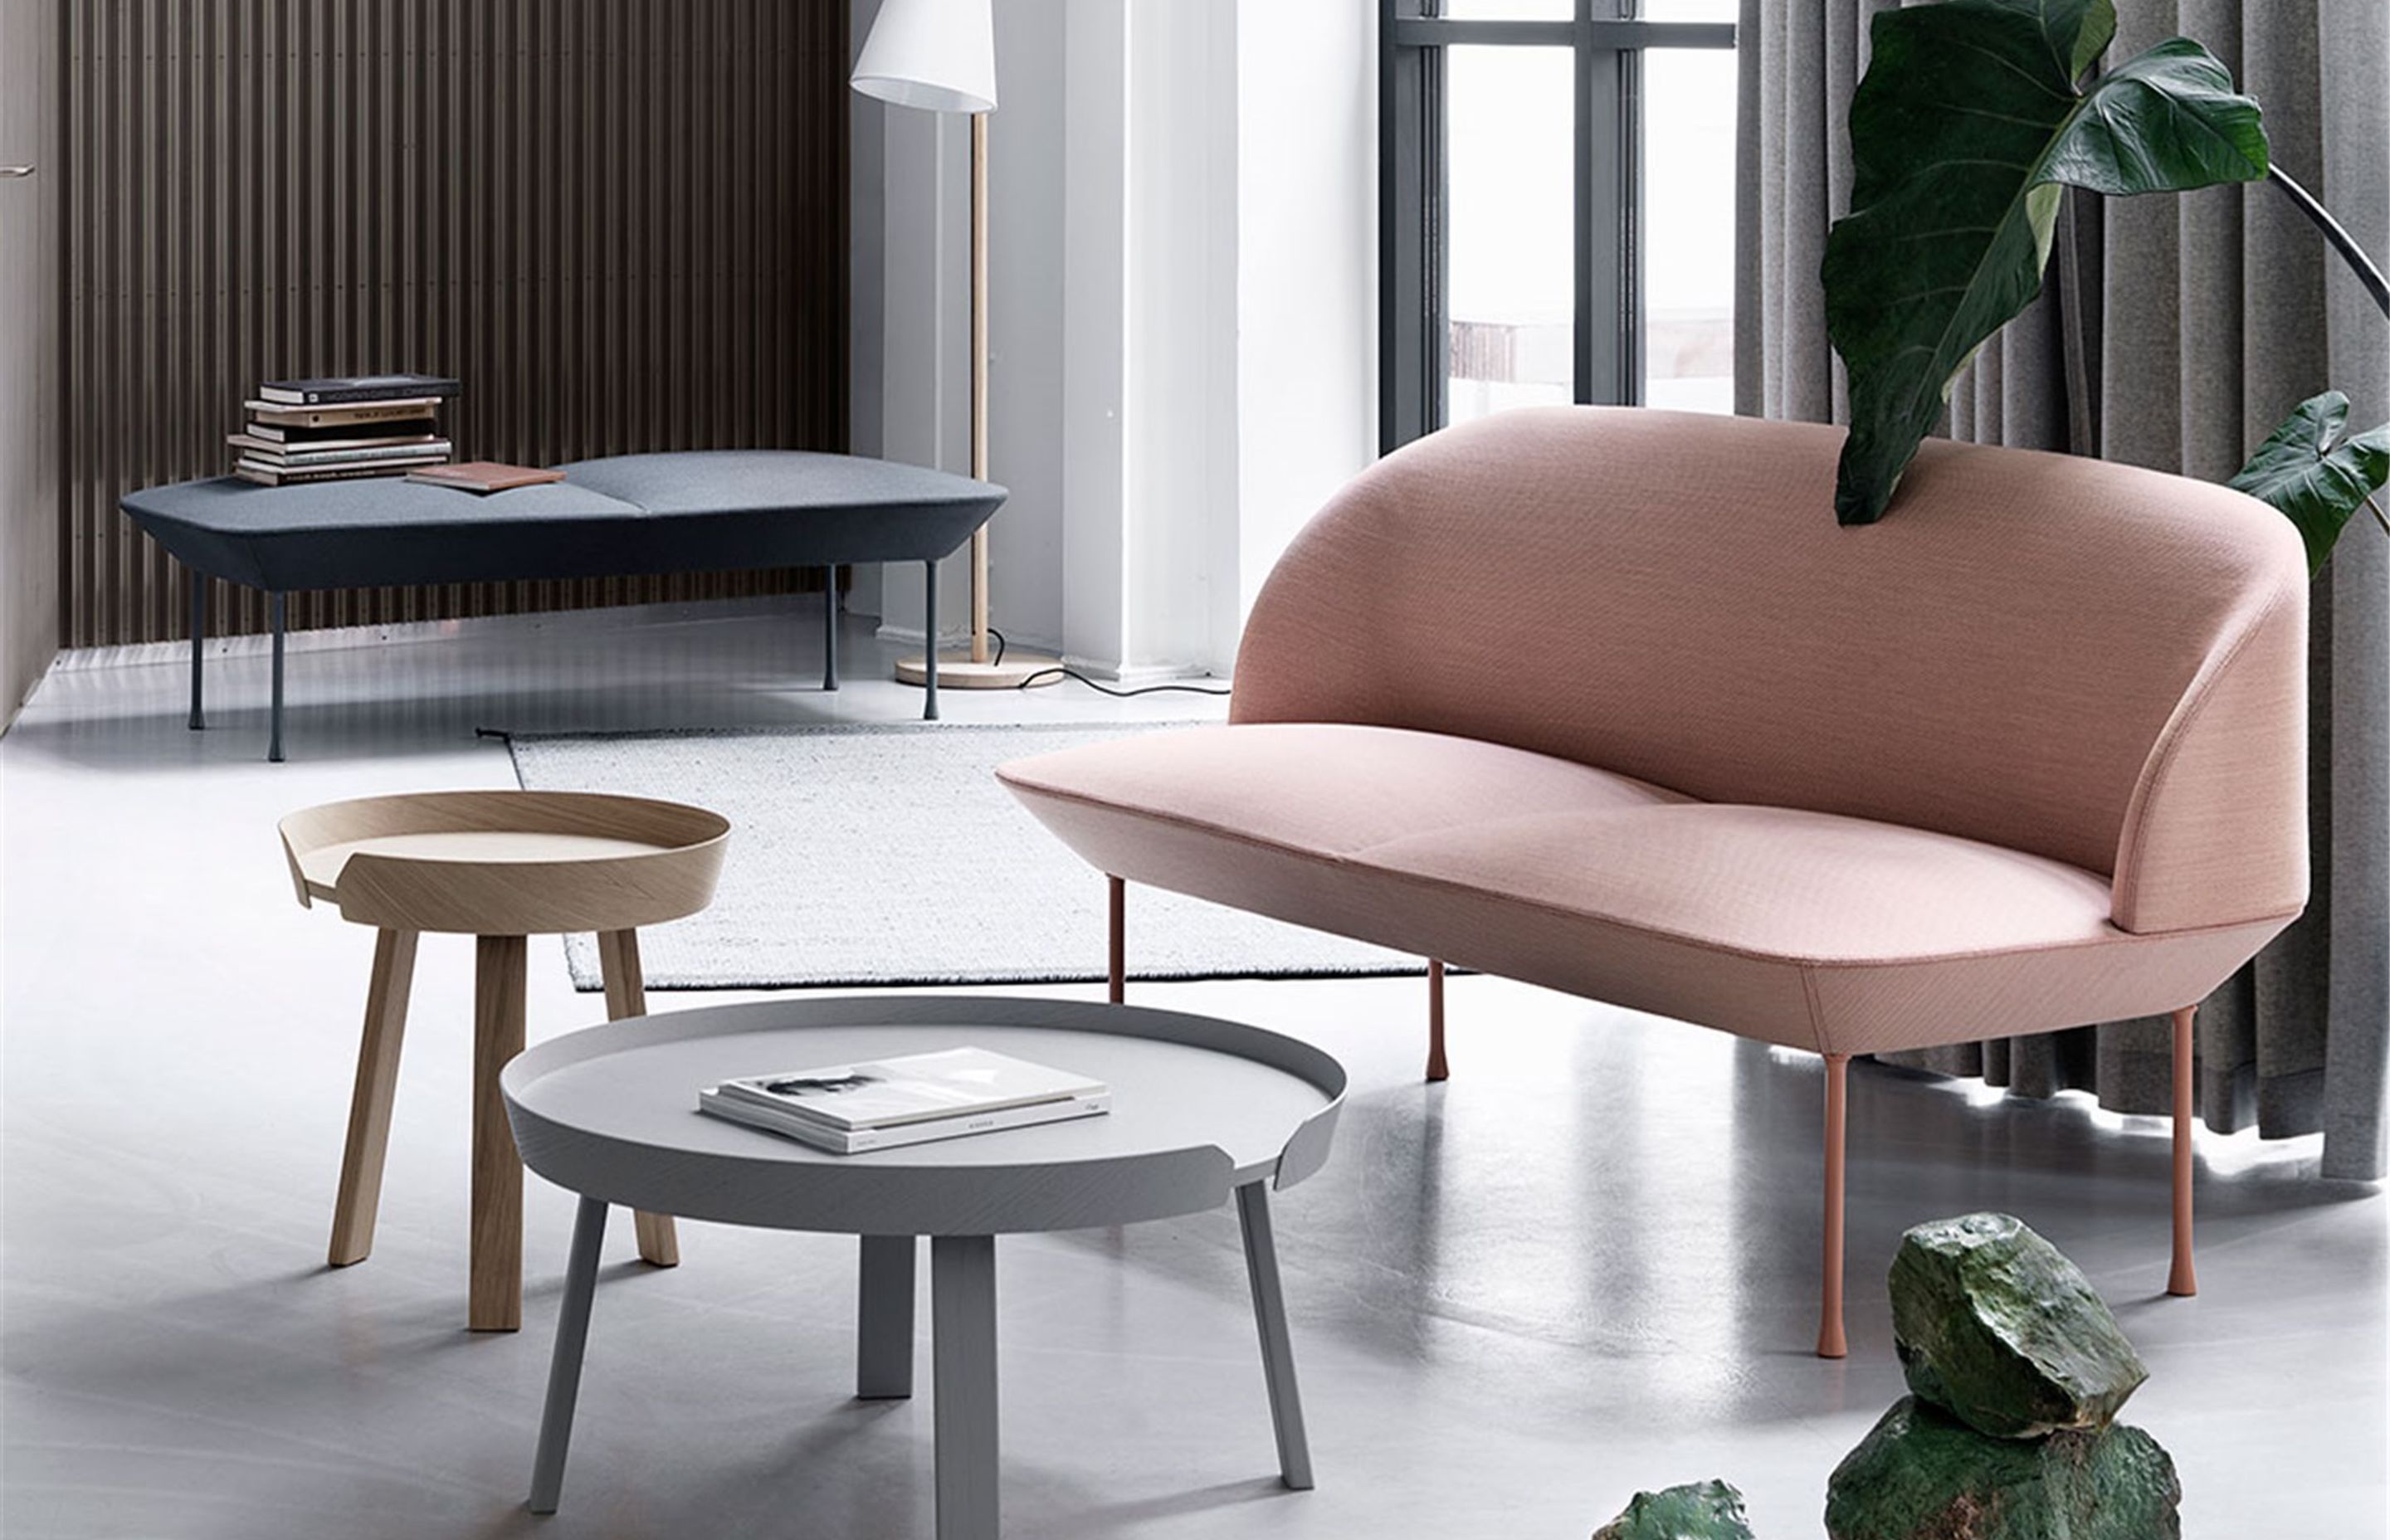 The Around coffee table in two sizes, designed by Thomas Bentzen for MUUTO.